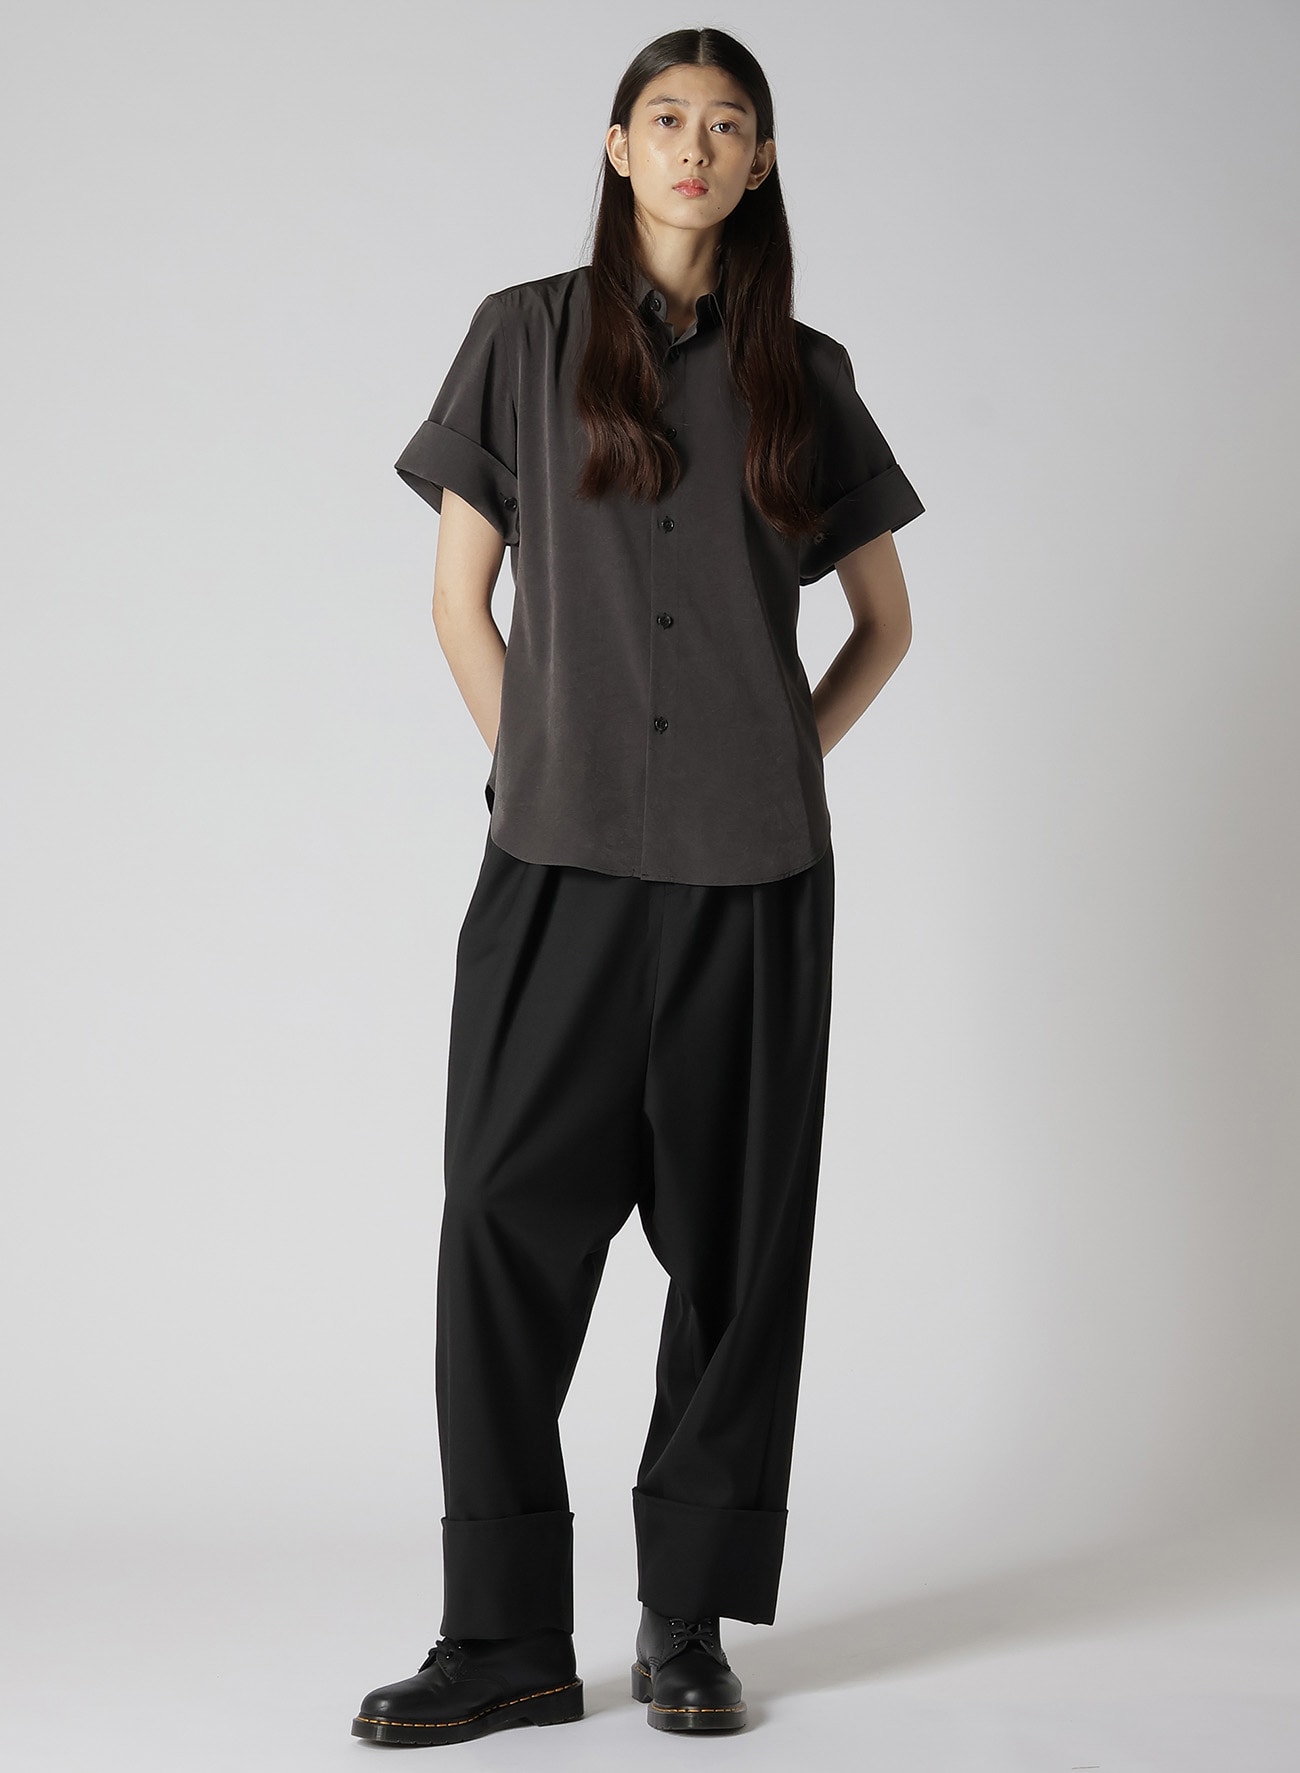 TRIACETATE/POLYESTER CREPE de CHINE DOUBLE CUFFS SHORT SLEEVE